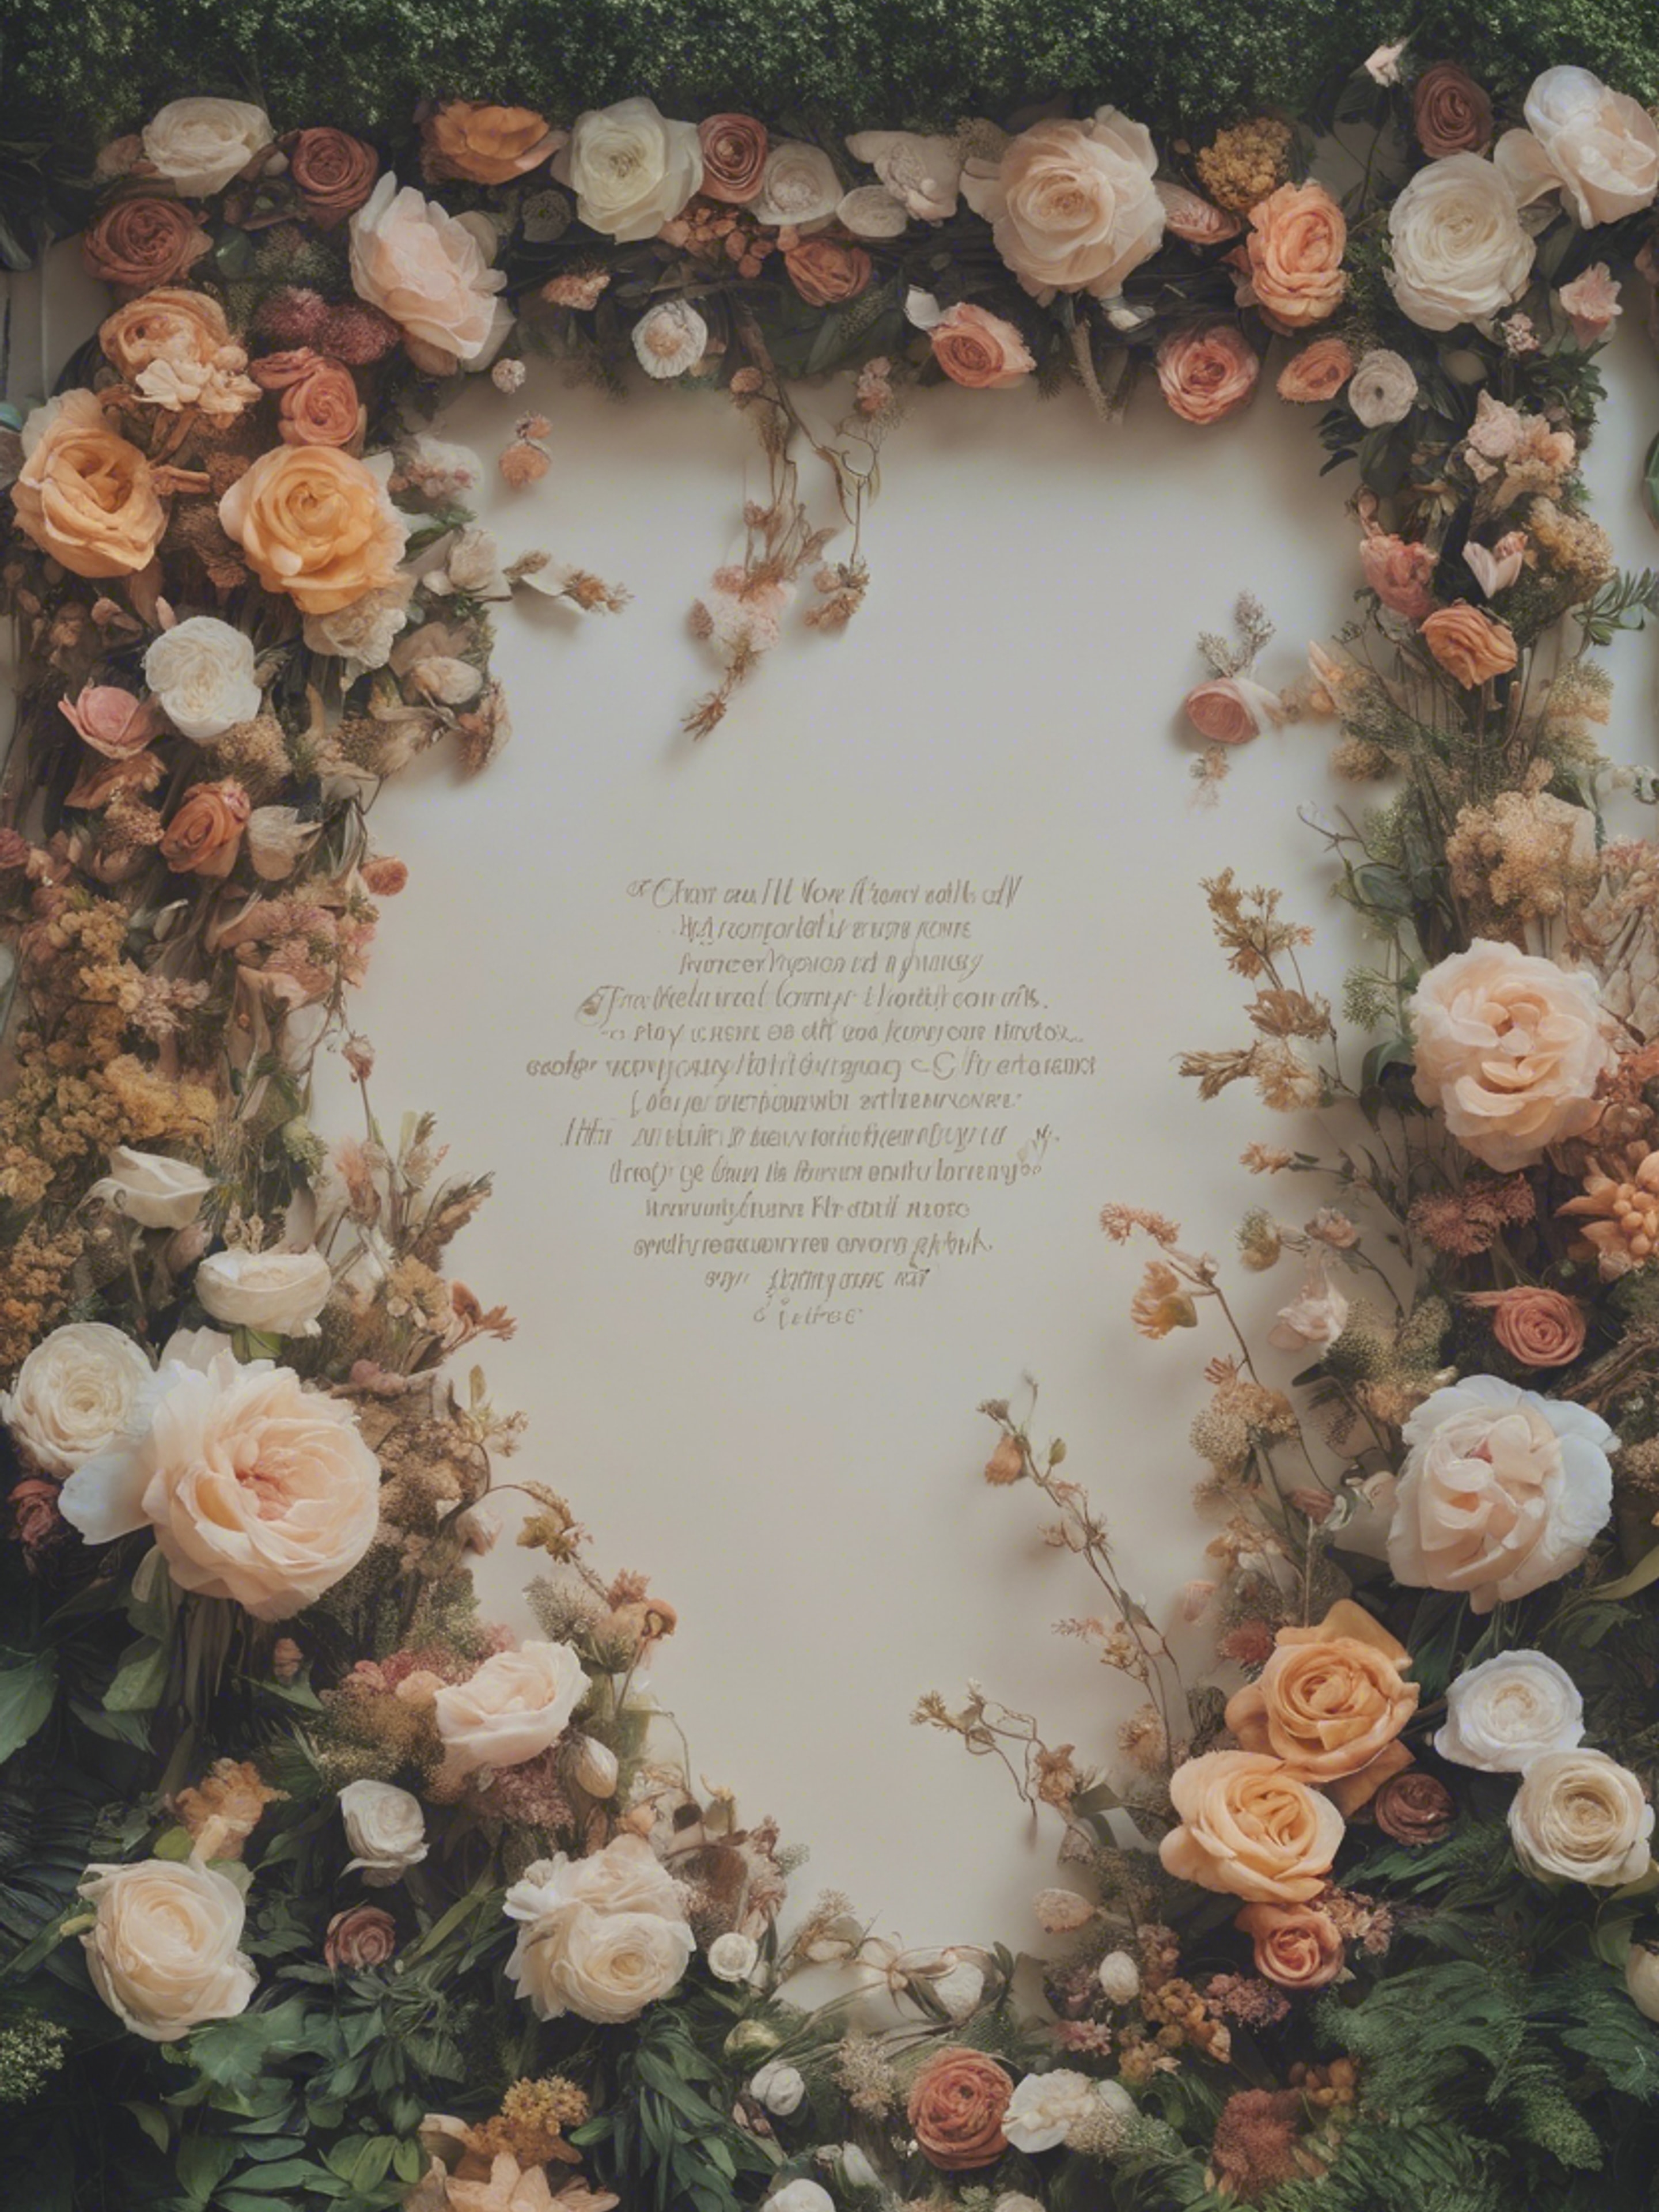 An intricate mural with a floral wreath enclosing a quote about the beauty of nature.壁紙[27f94657a4b841978695]